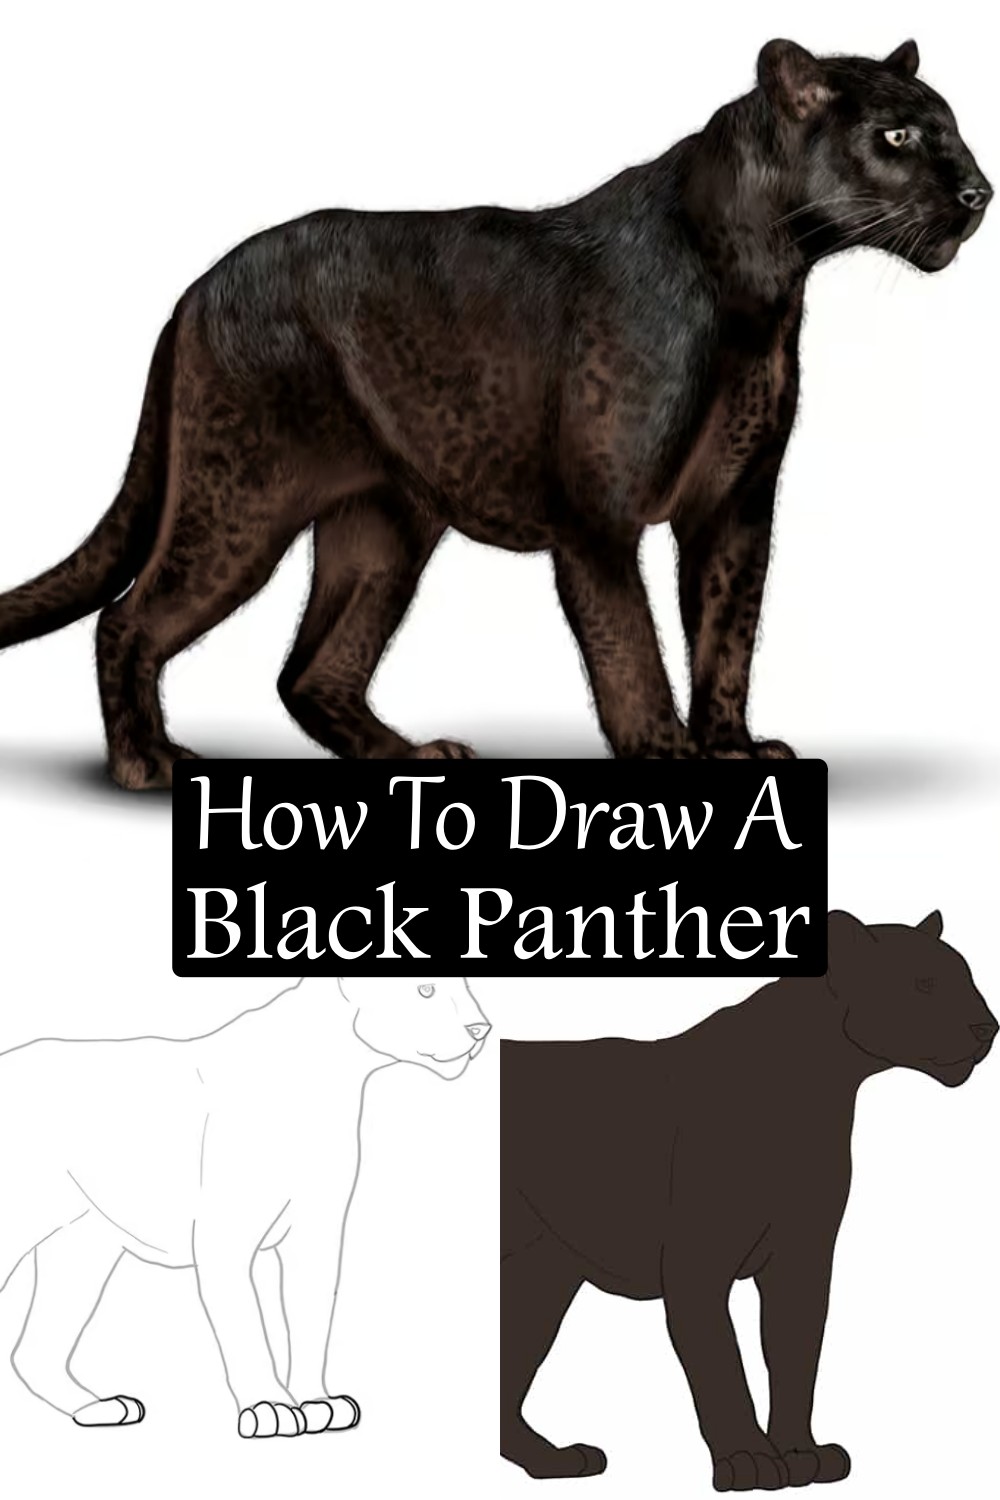 How To Draw A Black Panther